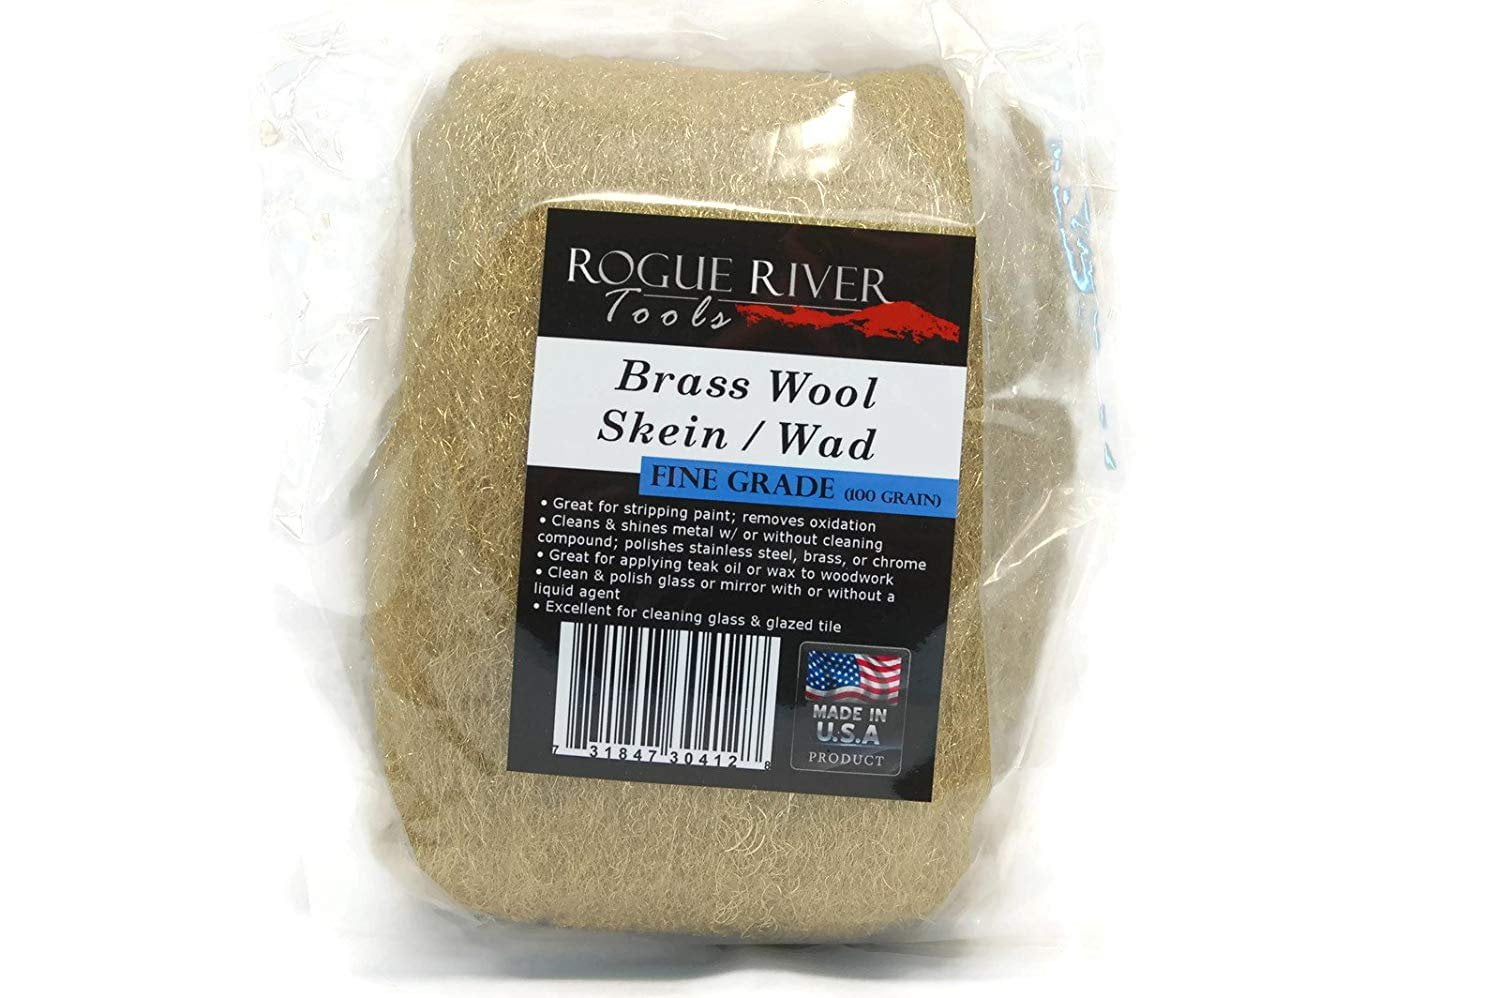 Brass Wool 3.5 Oz Skein/Pad/Wad -by Rogue River Tools. FINE grade